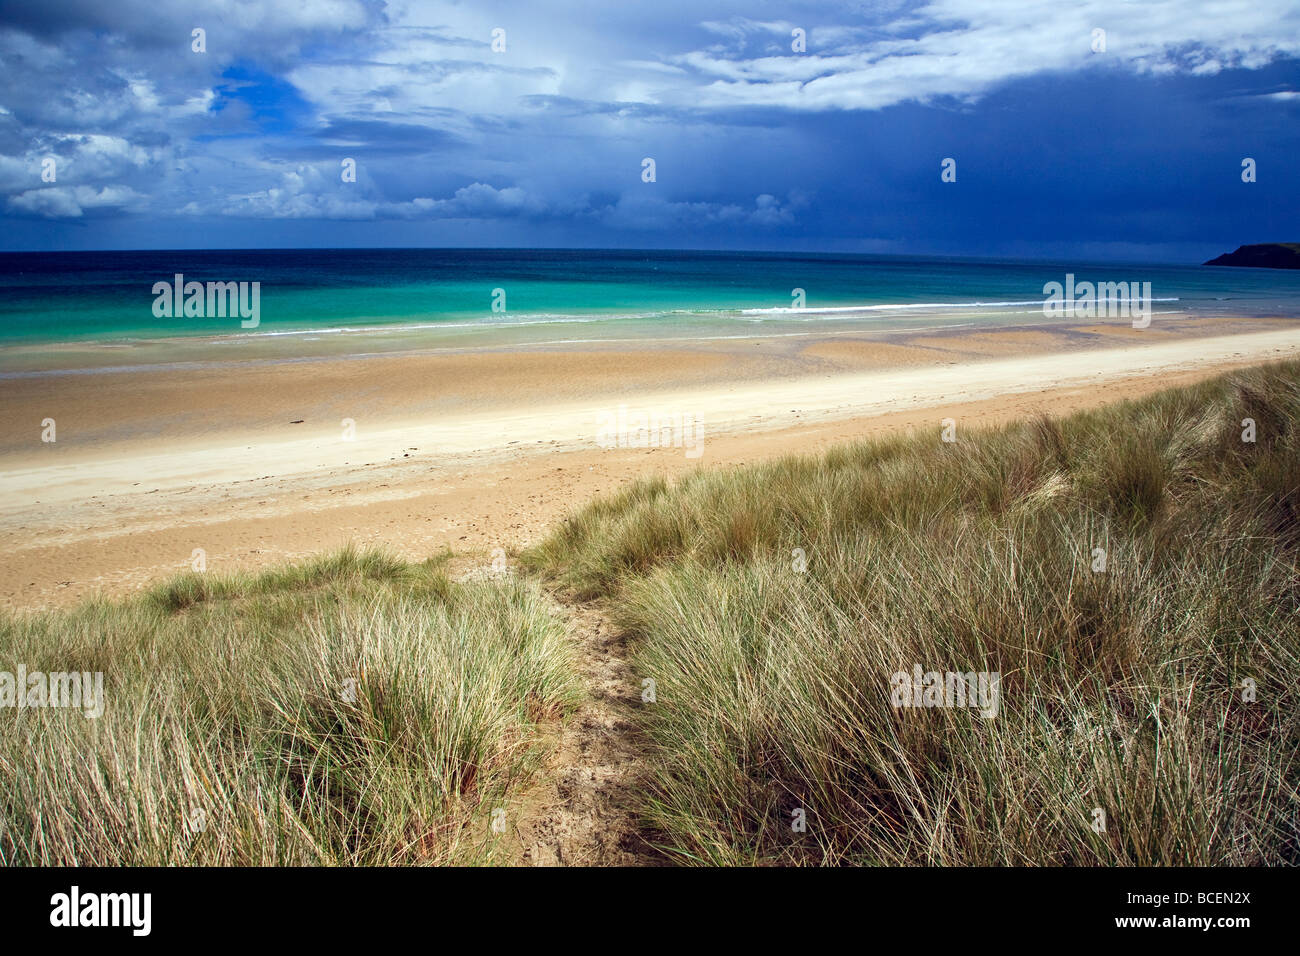 Traigh Mhor Tolsta beach Isle of Lewis, Outer, Hebrides, Western Isles, Scotland UK 2009 Stock Photo